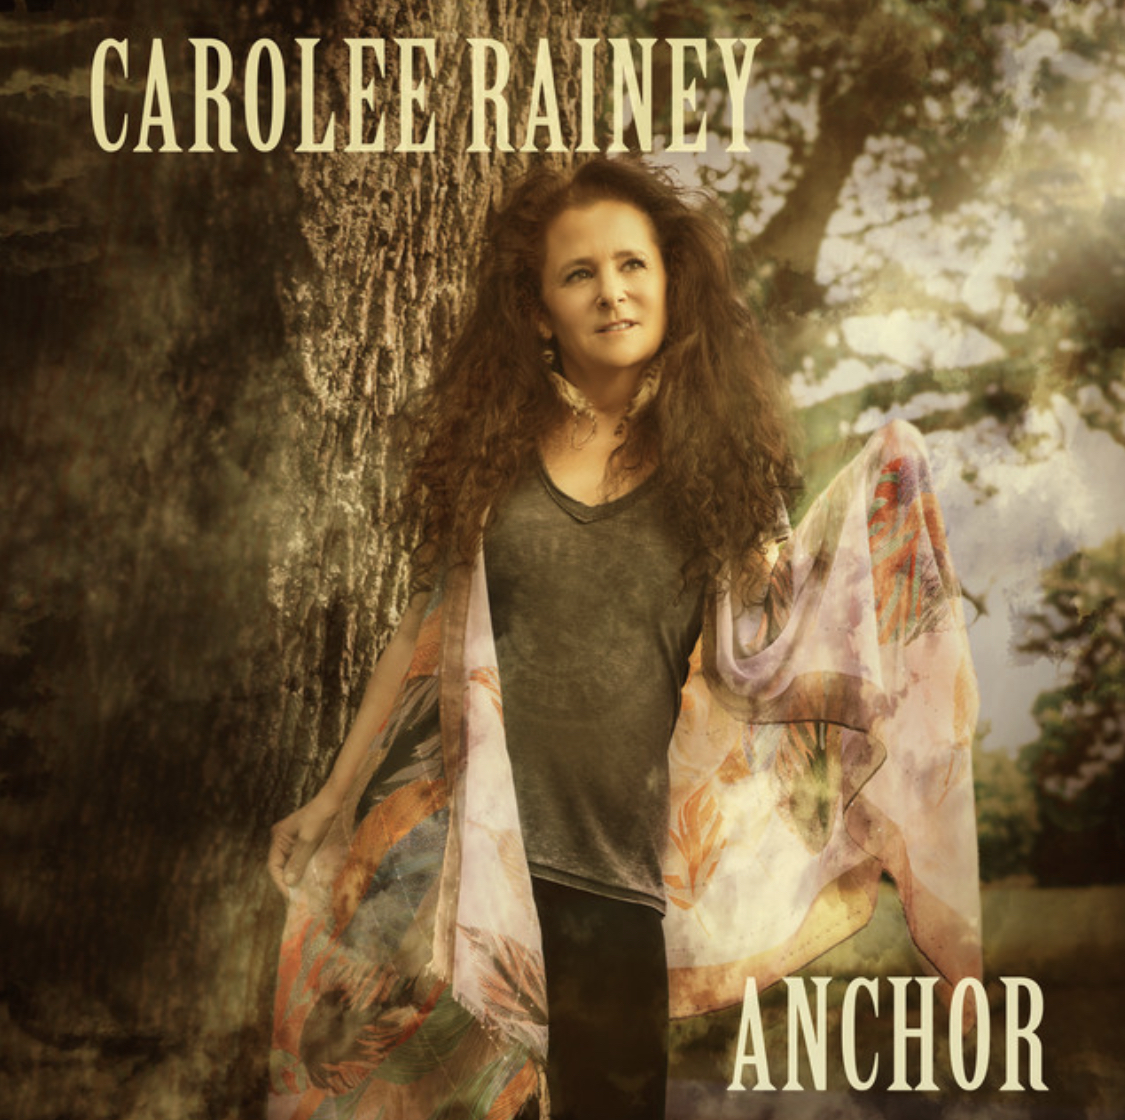 Carolee Rainey’s new single ‘Anchor’ has kept her grounded throughout life’s challenges